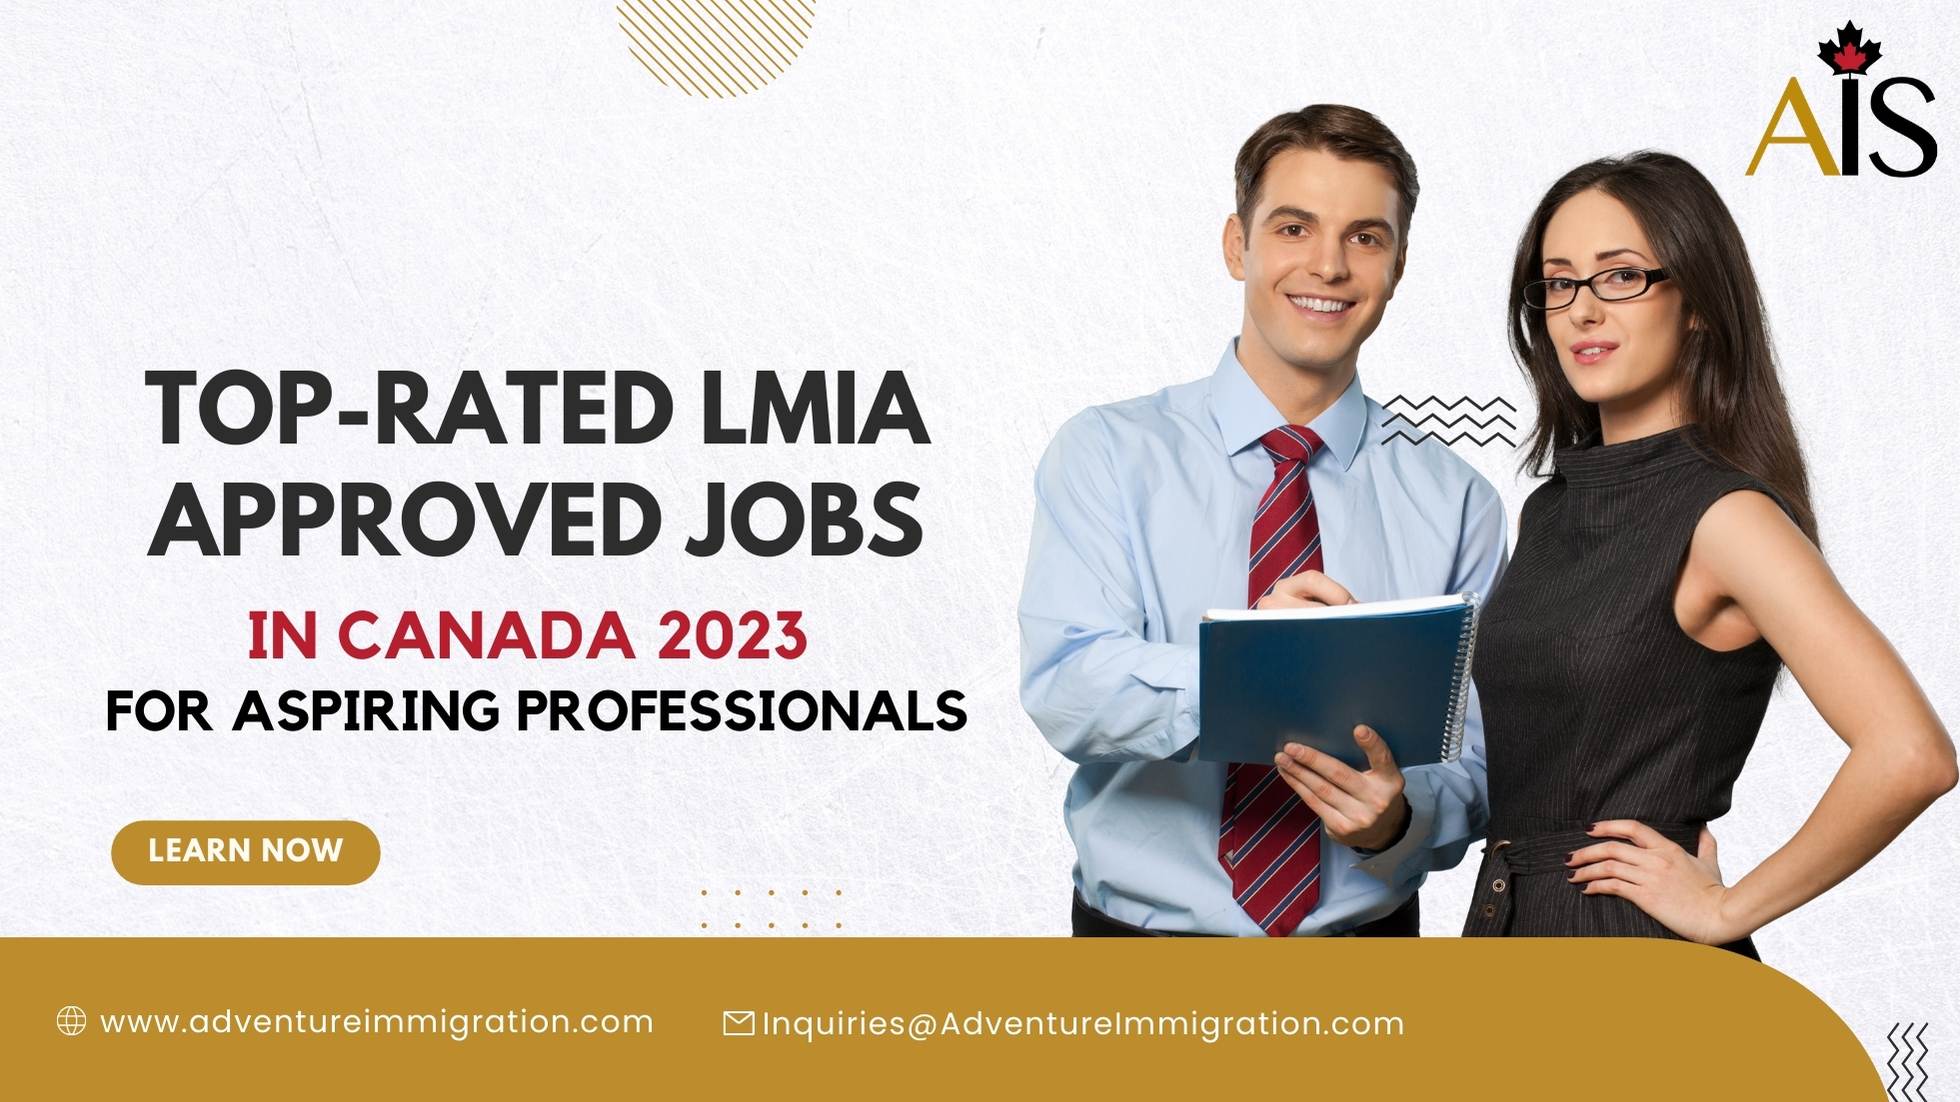 Top-Rated LMIA Approved Jobs in Canada 2023 for Aspiring Professionals